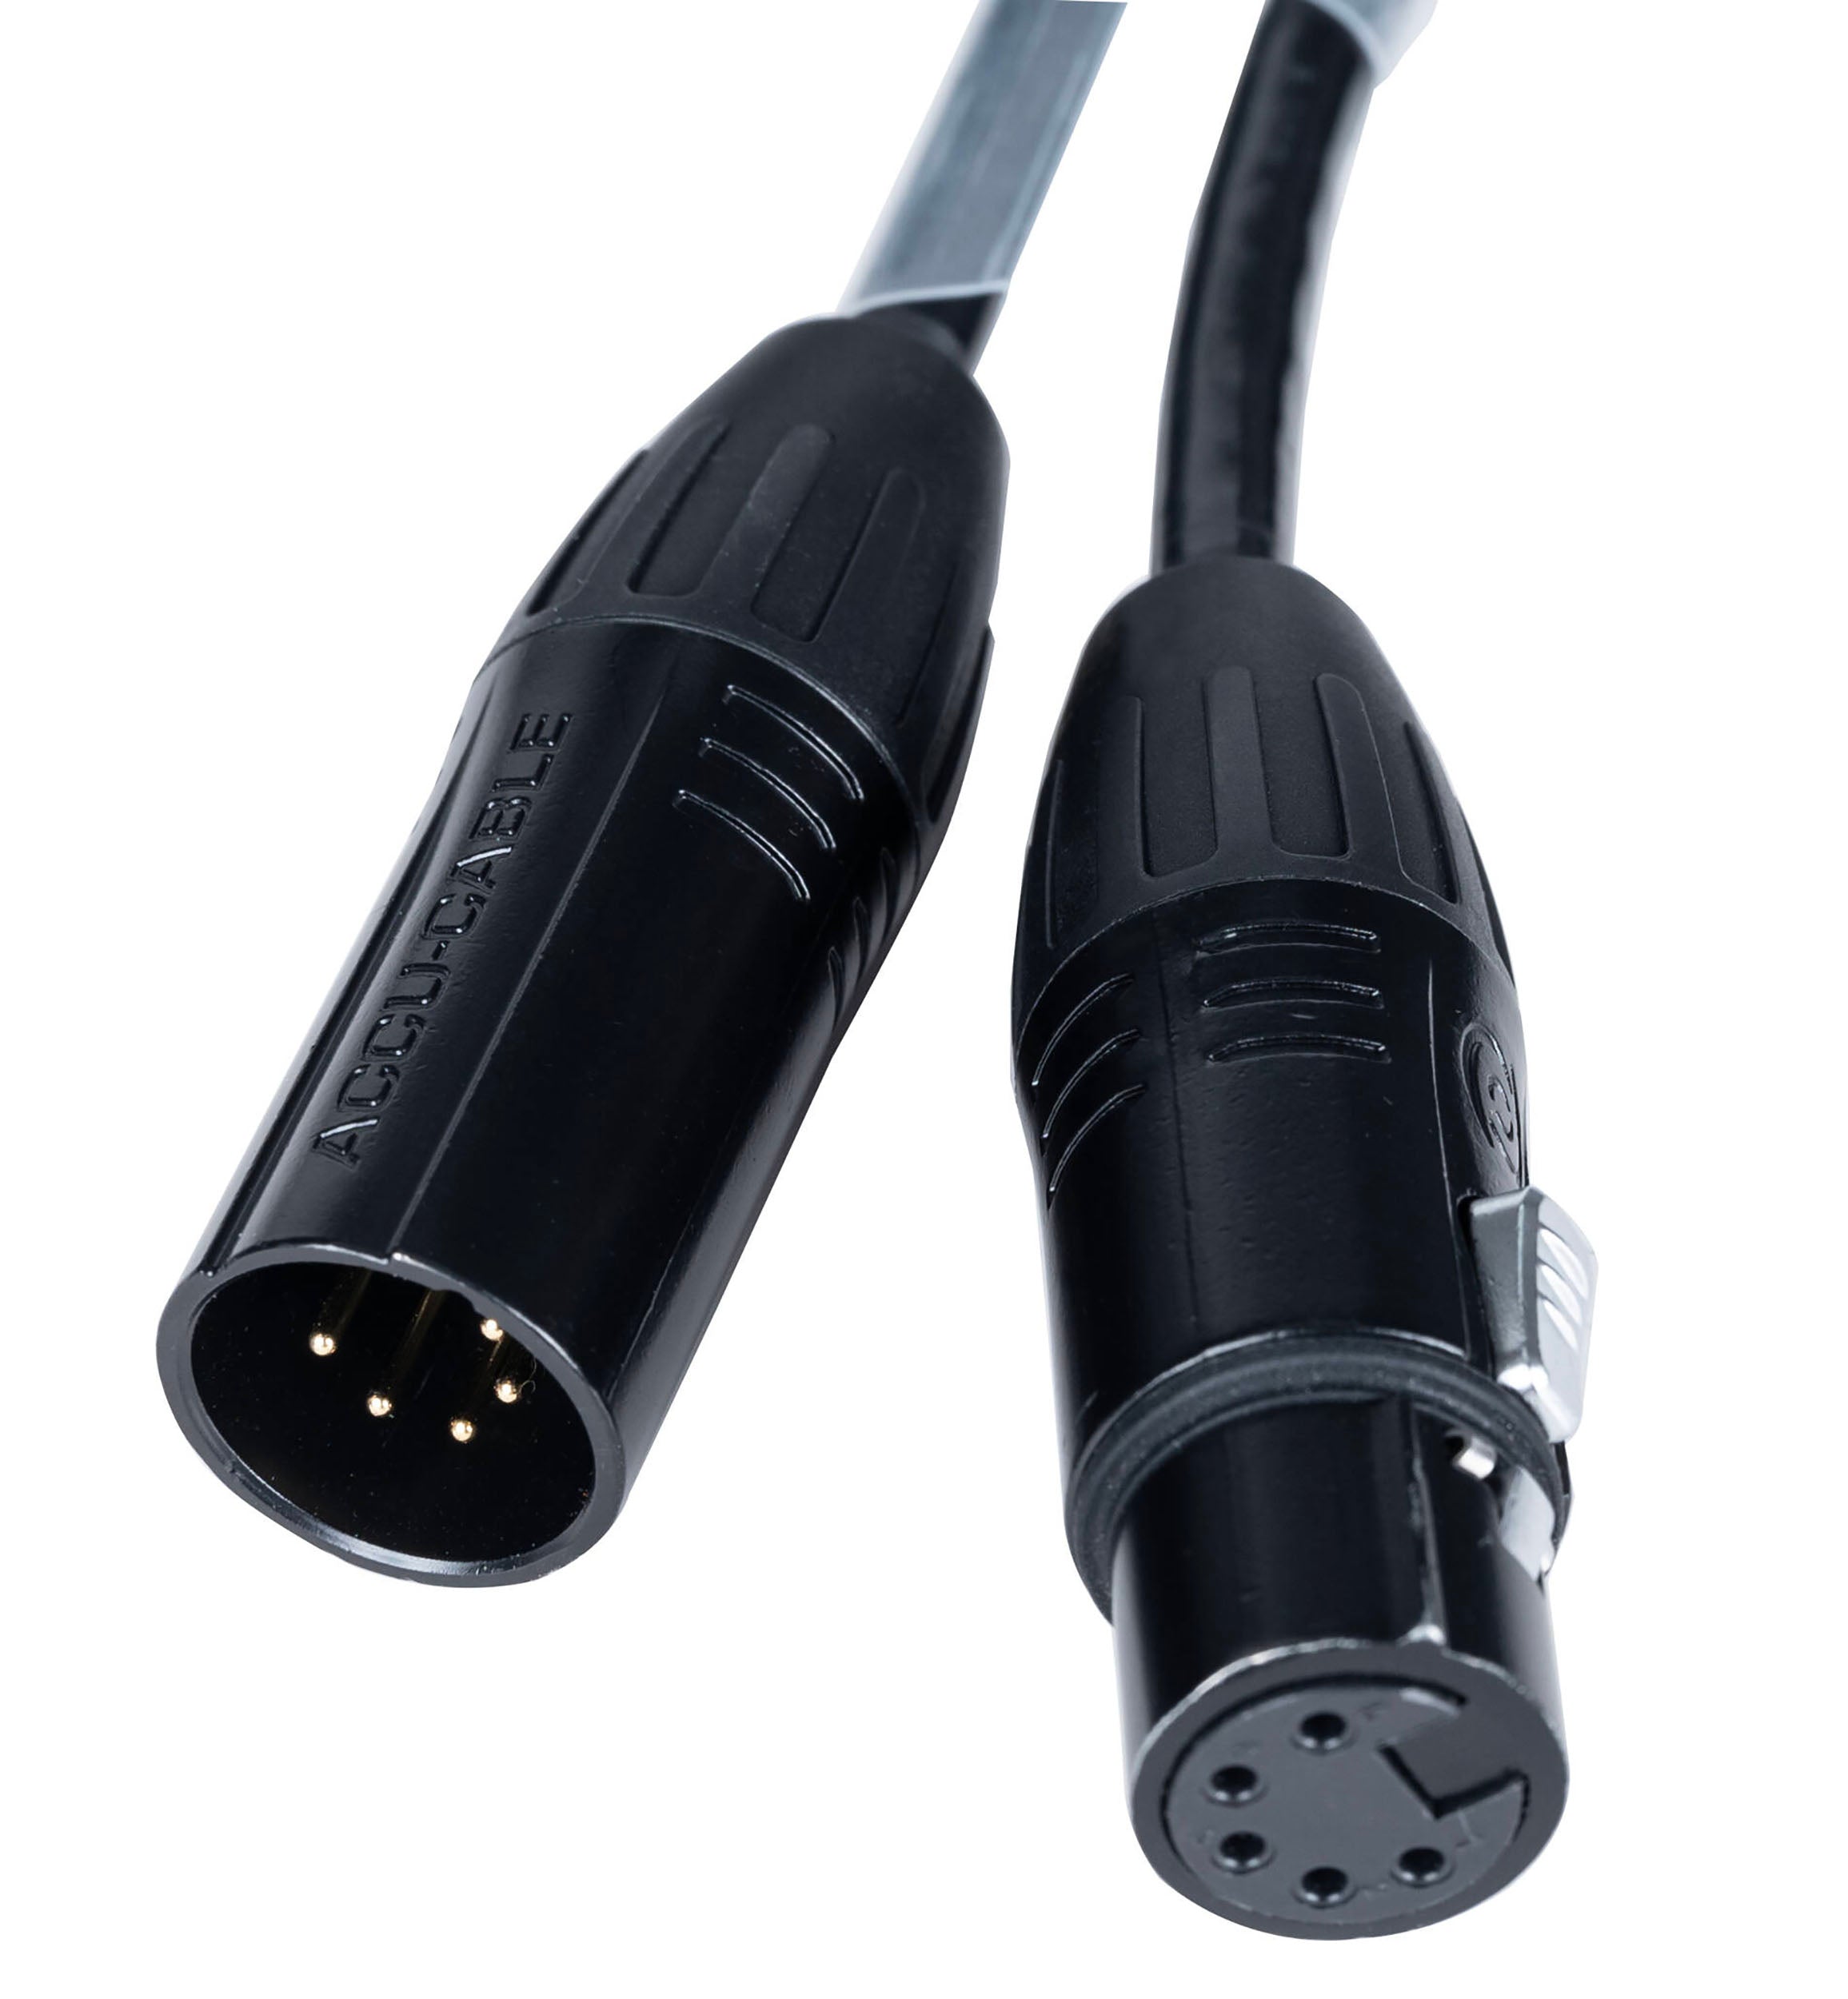 Accu-Cable Tour Link 5P10 5-Pin DMX Cable - 10 Feet by Accu Cable